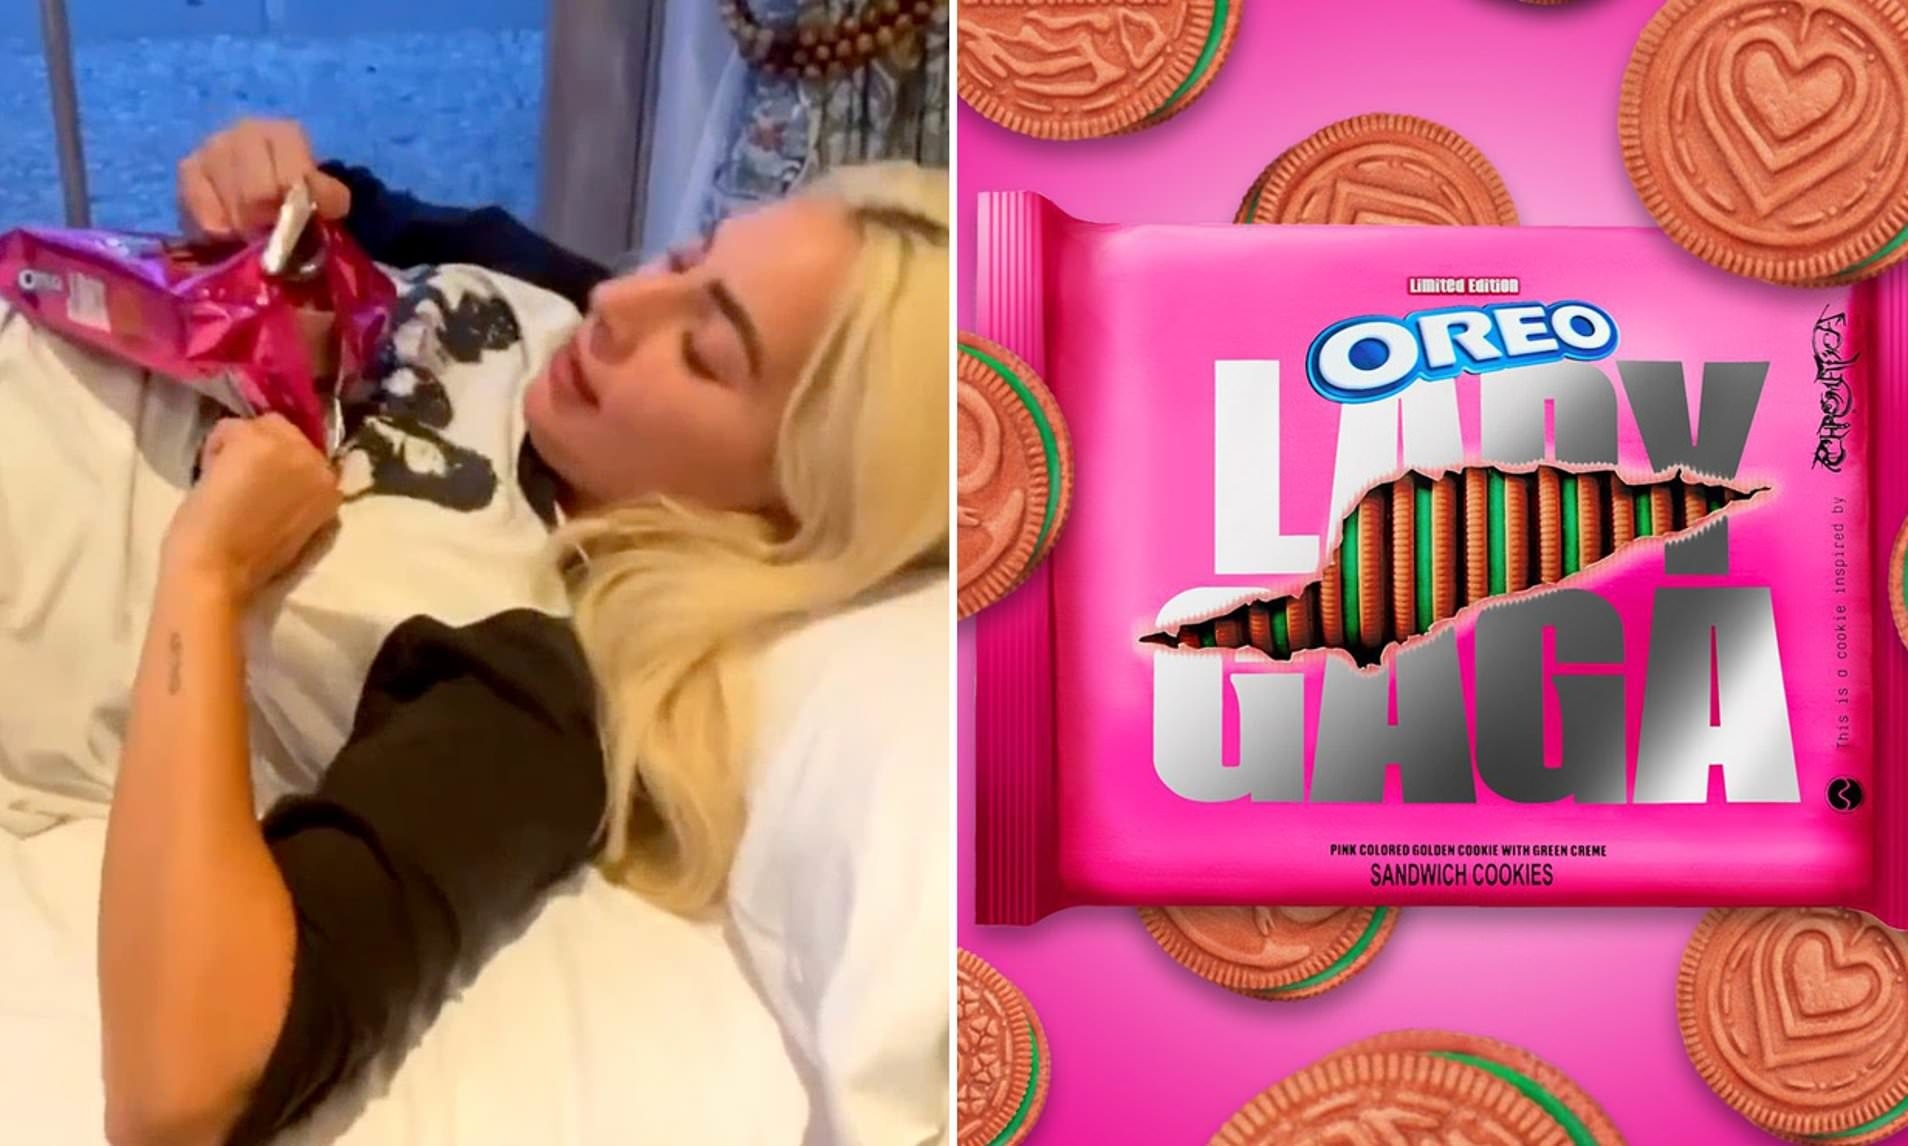 A side by side: Lady Gaga lies in bed ripping open a pink packet, then an image of the pink and green Lady Gaga Oreos